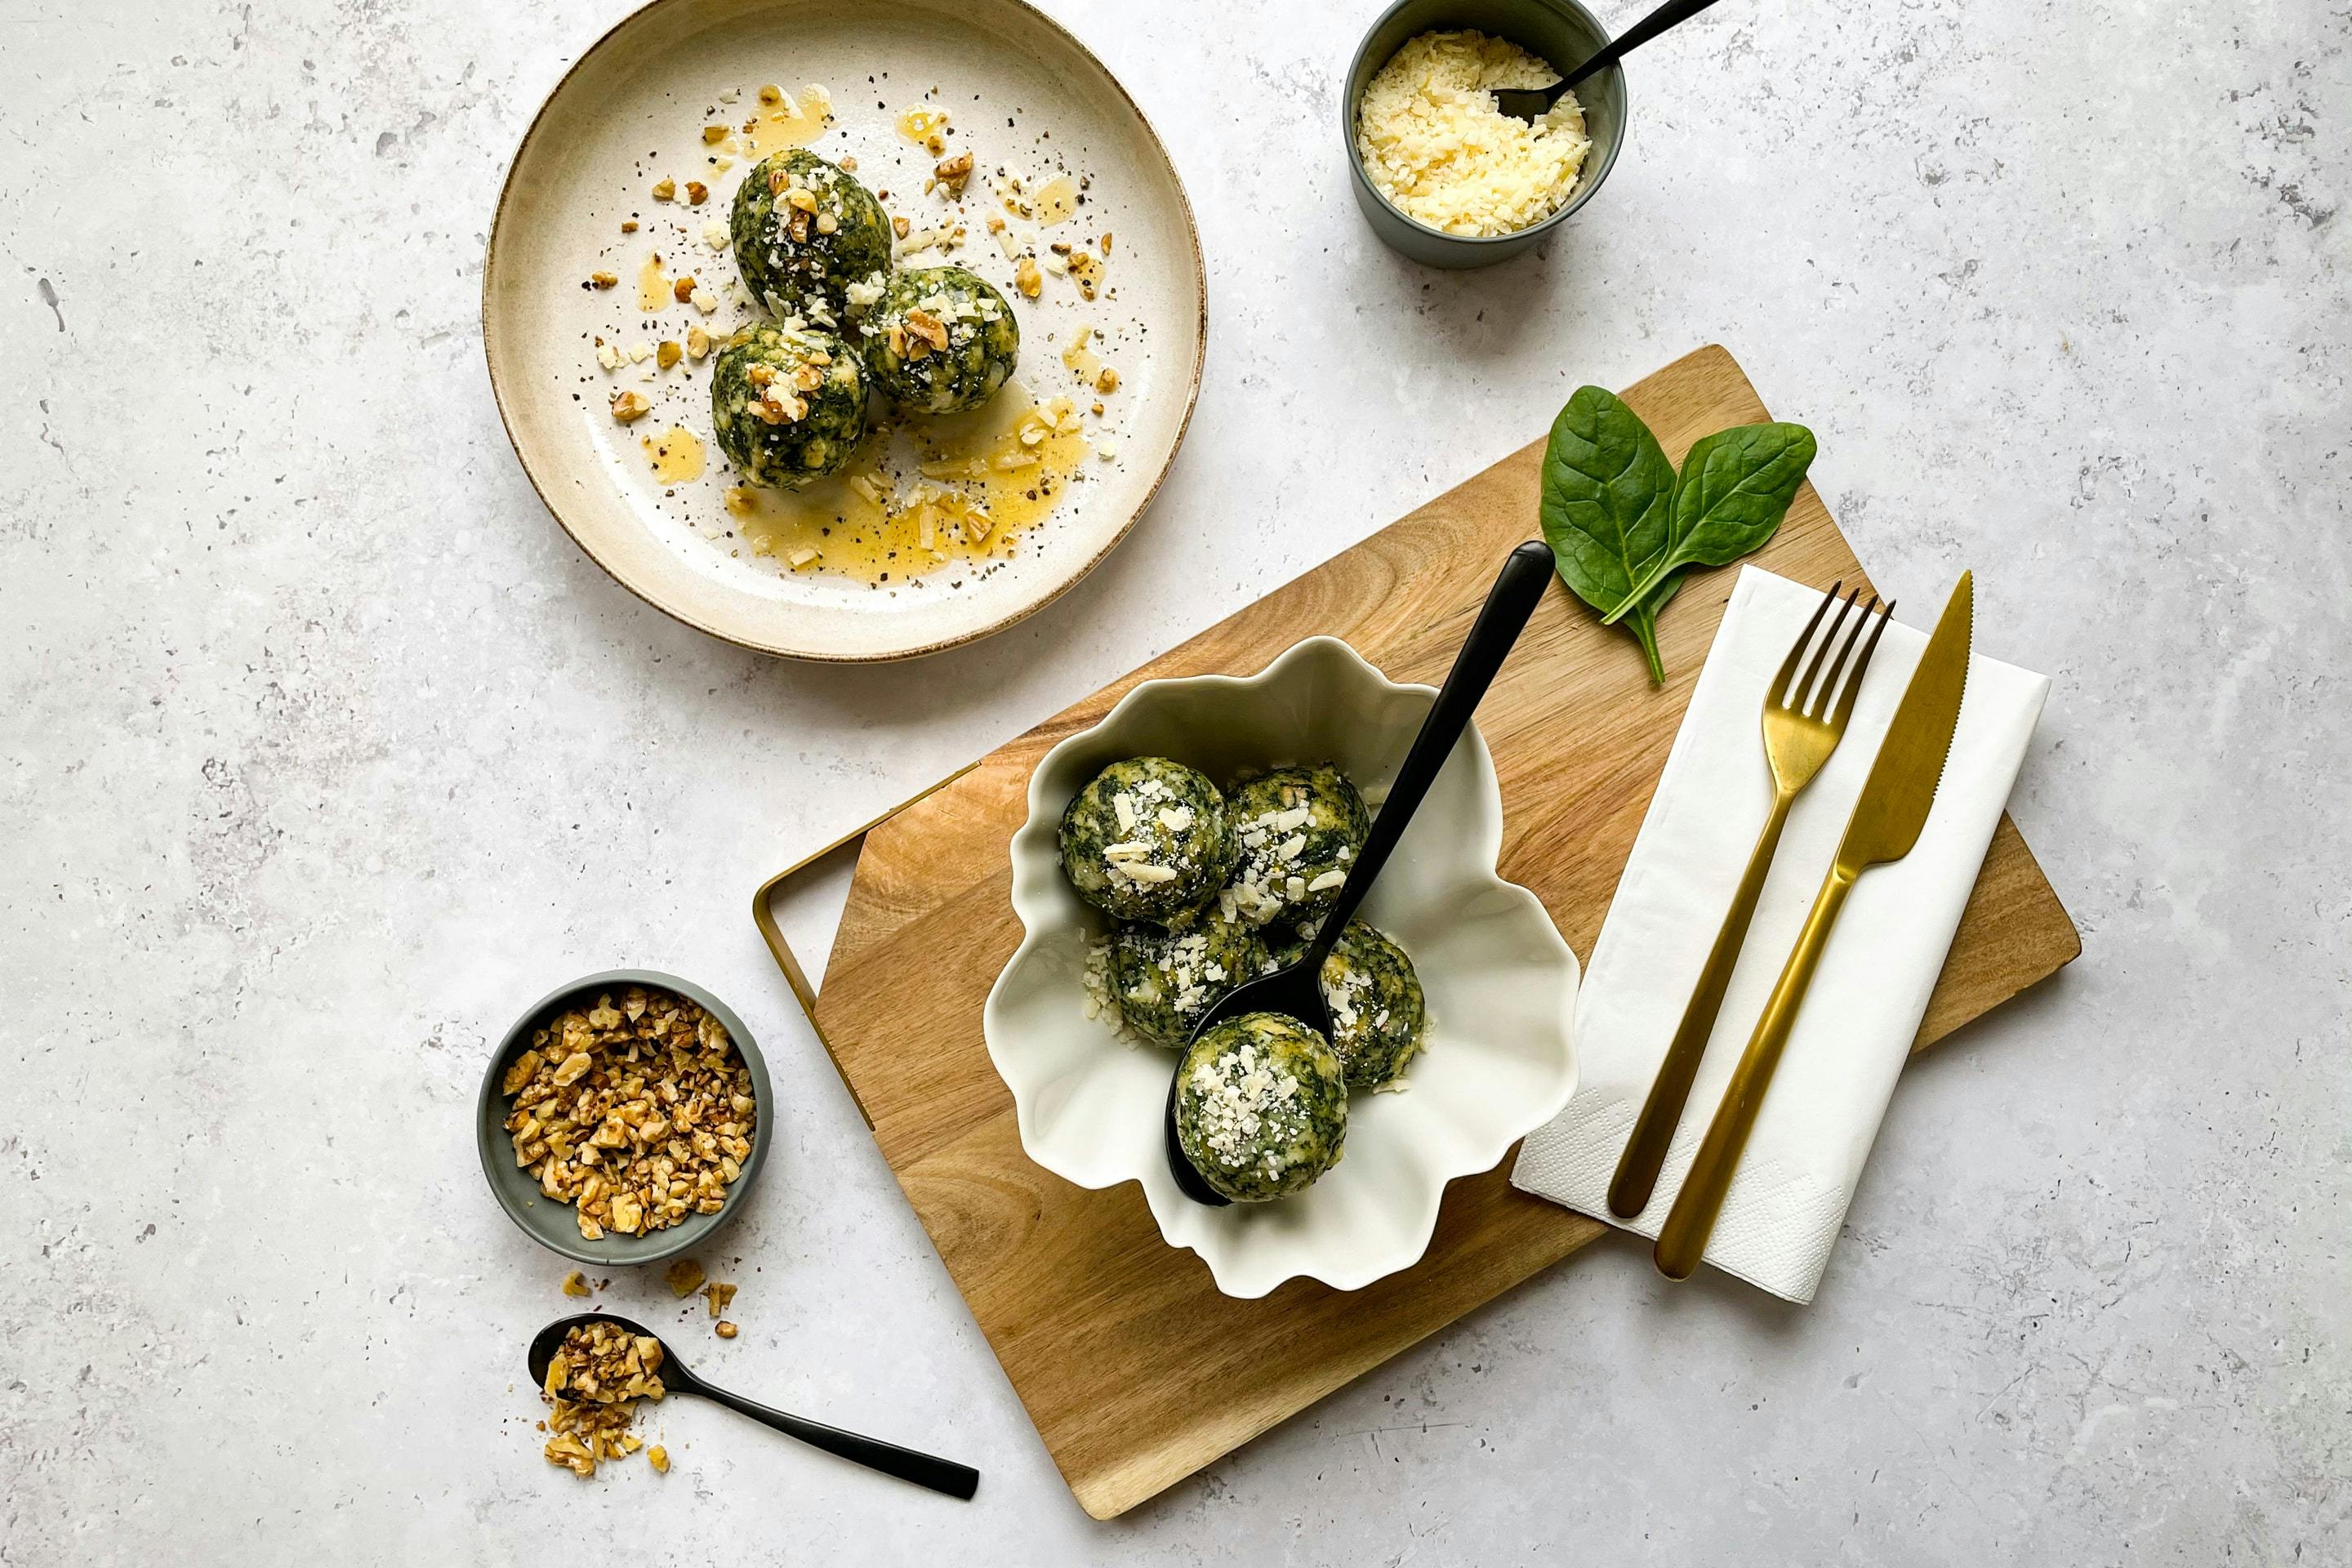 Tasty spinach dumplings with nut butter and spices.